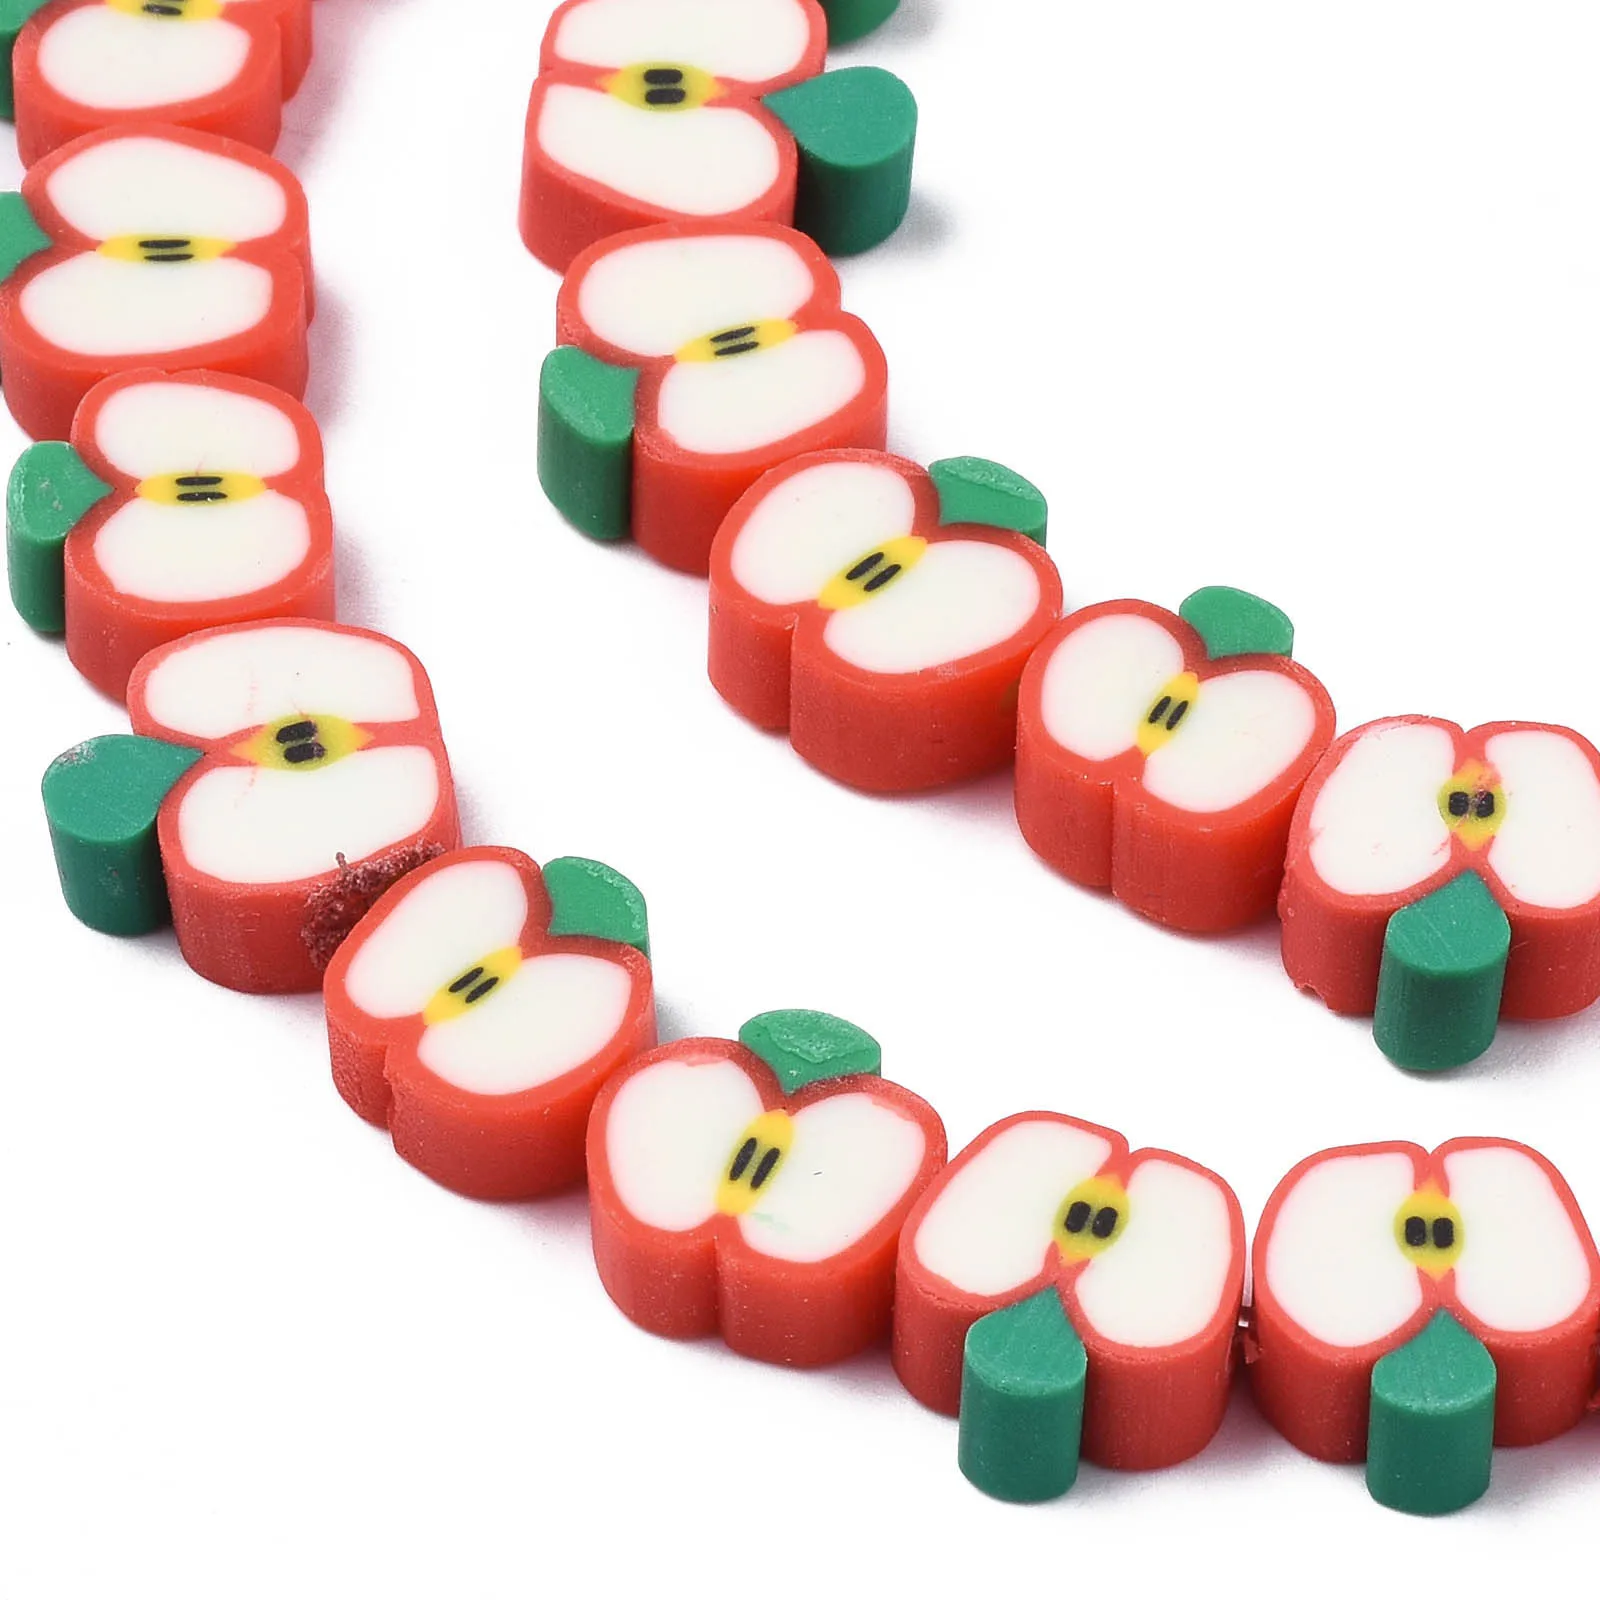 

10strands Red Apple Slice Shape Handmade Polymer Clay Beads Fruit Spacer Beads For DIY Bracelet Accessories Jewelry Making